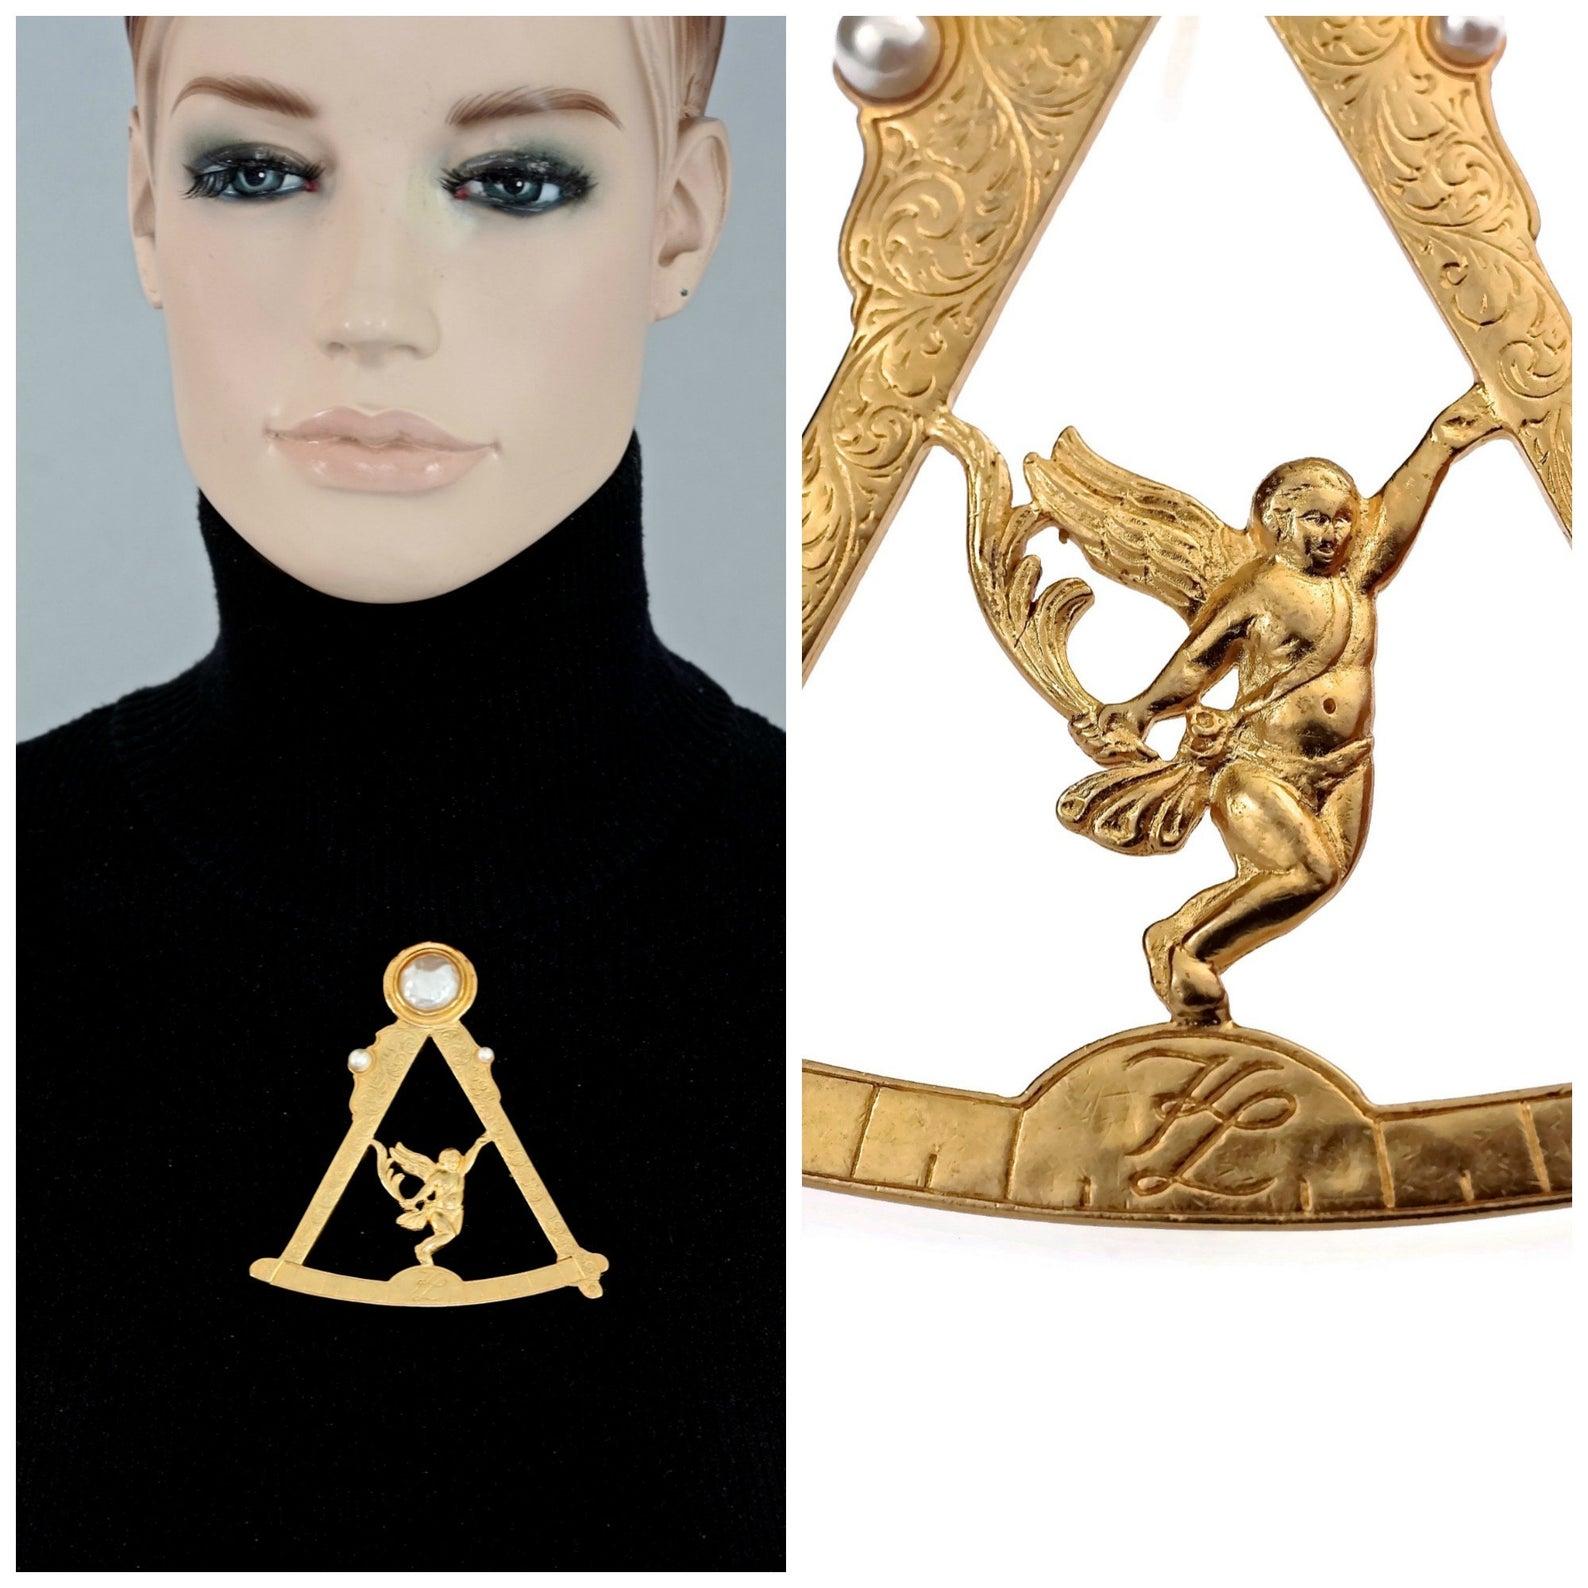 Vintage KARL LAGERFELD Scale Angel Cherub Pearl Logo Novelty Brooch

Measurements:
Height: 3.77 inches (9.6 cm)
Width: 3.38 inches (8.6 cm)

FEATURES:
- 100% Authentic KARL LAGERFELD.
- Novelty scale with an angel/ cherub at the centre.
-